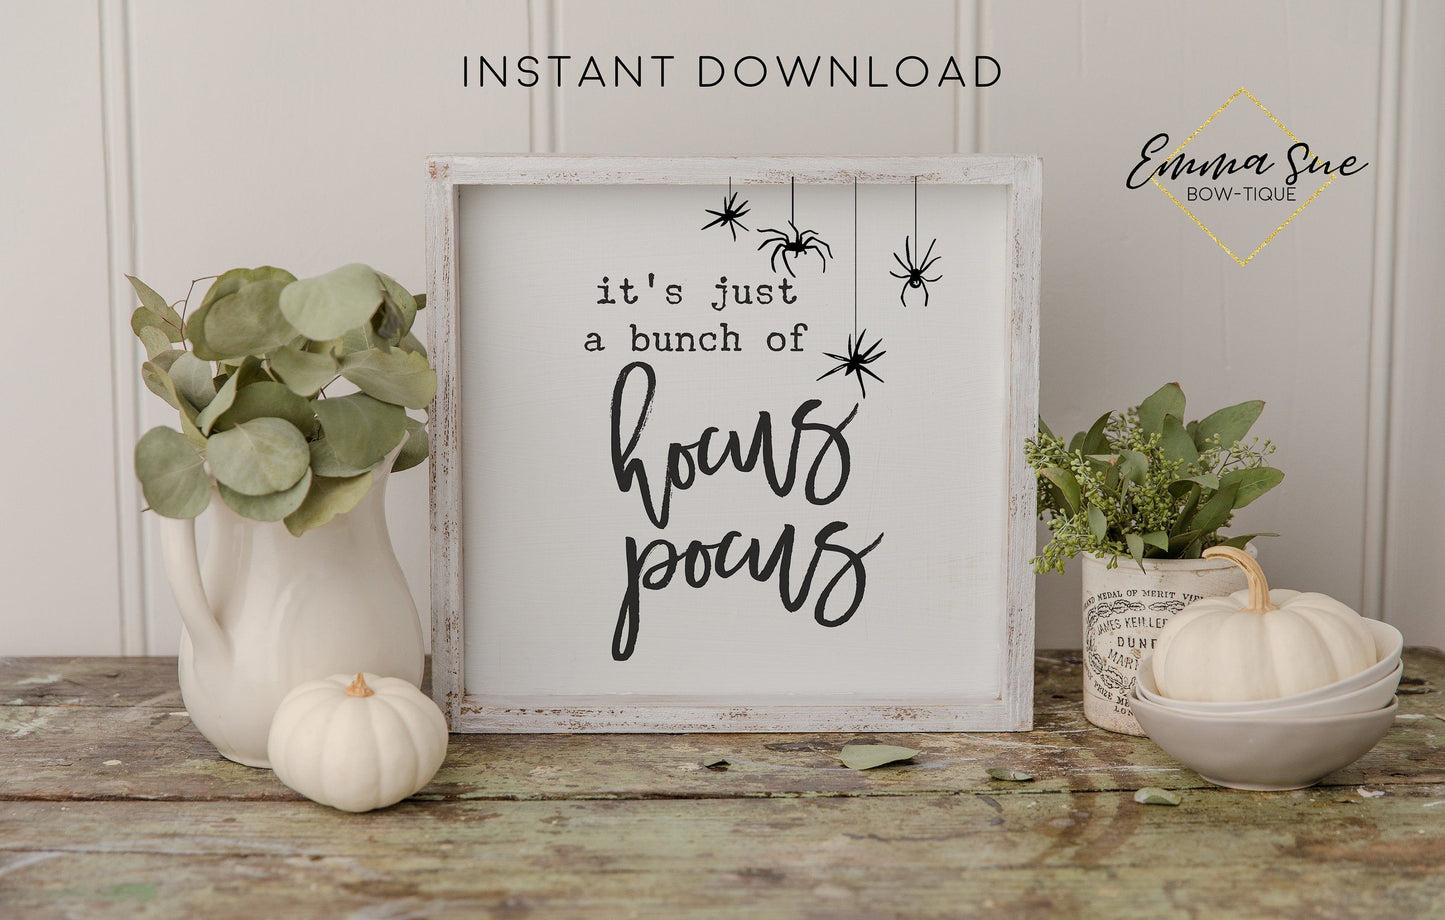 It's just a bunch of Hocus Pocus - Halloween Decor Printable Sign Farmhouse Style  - Digital File